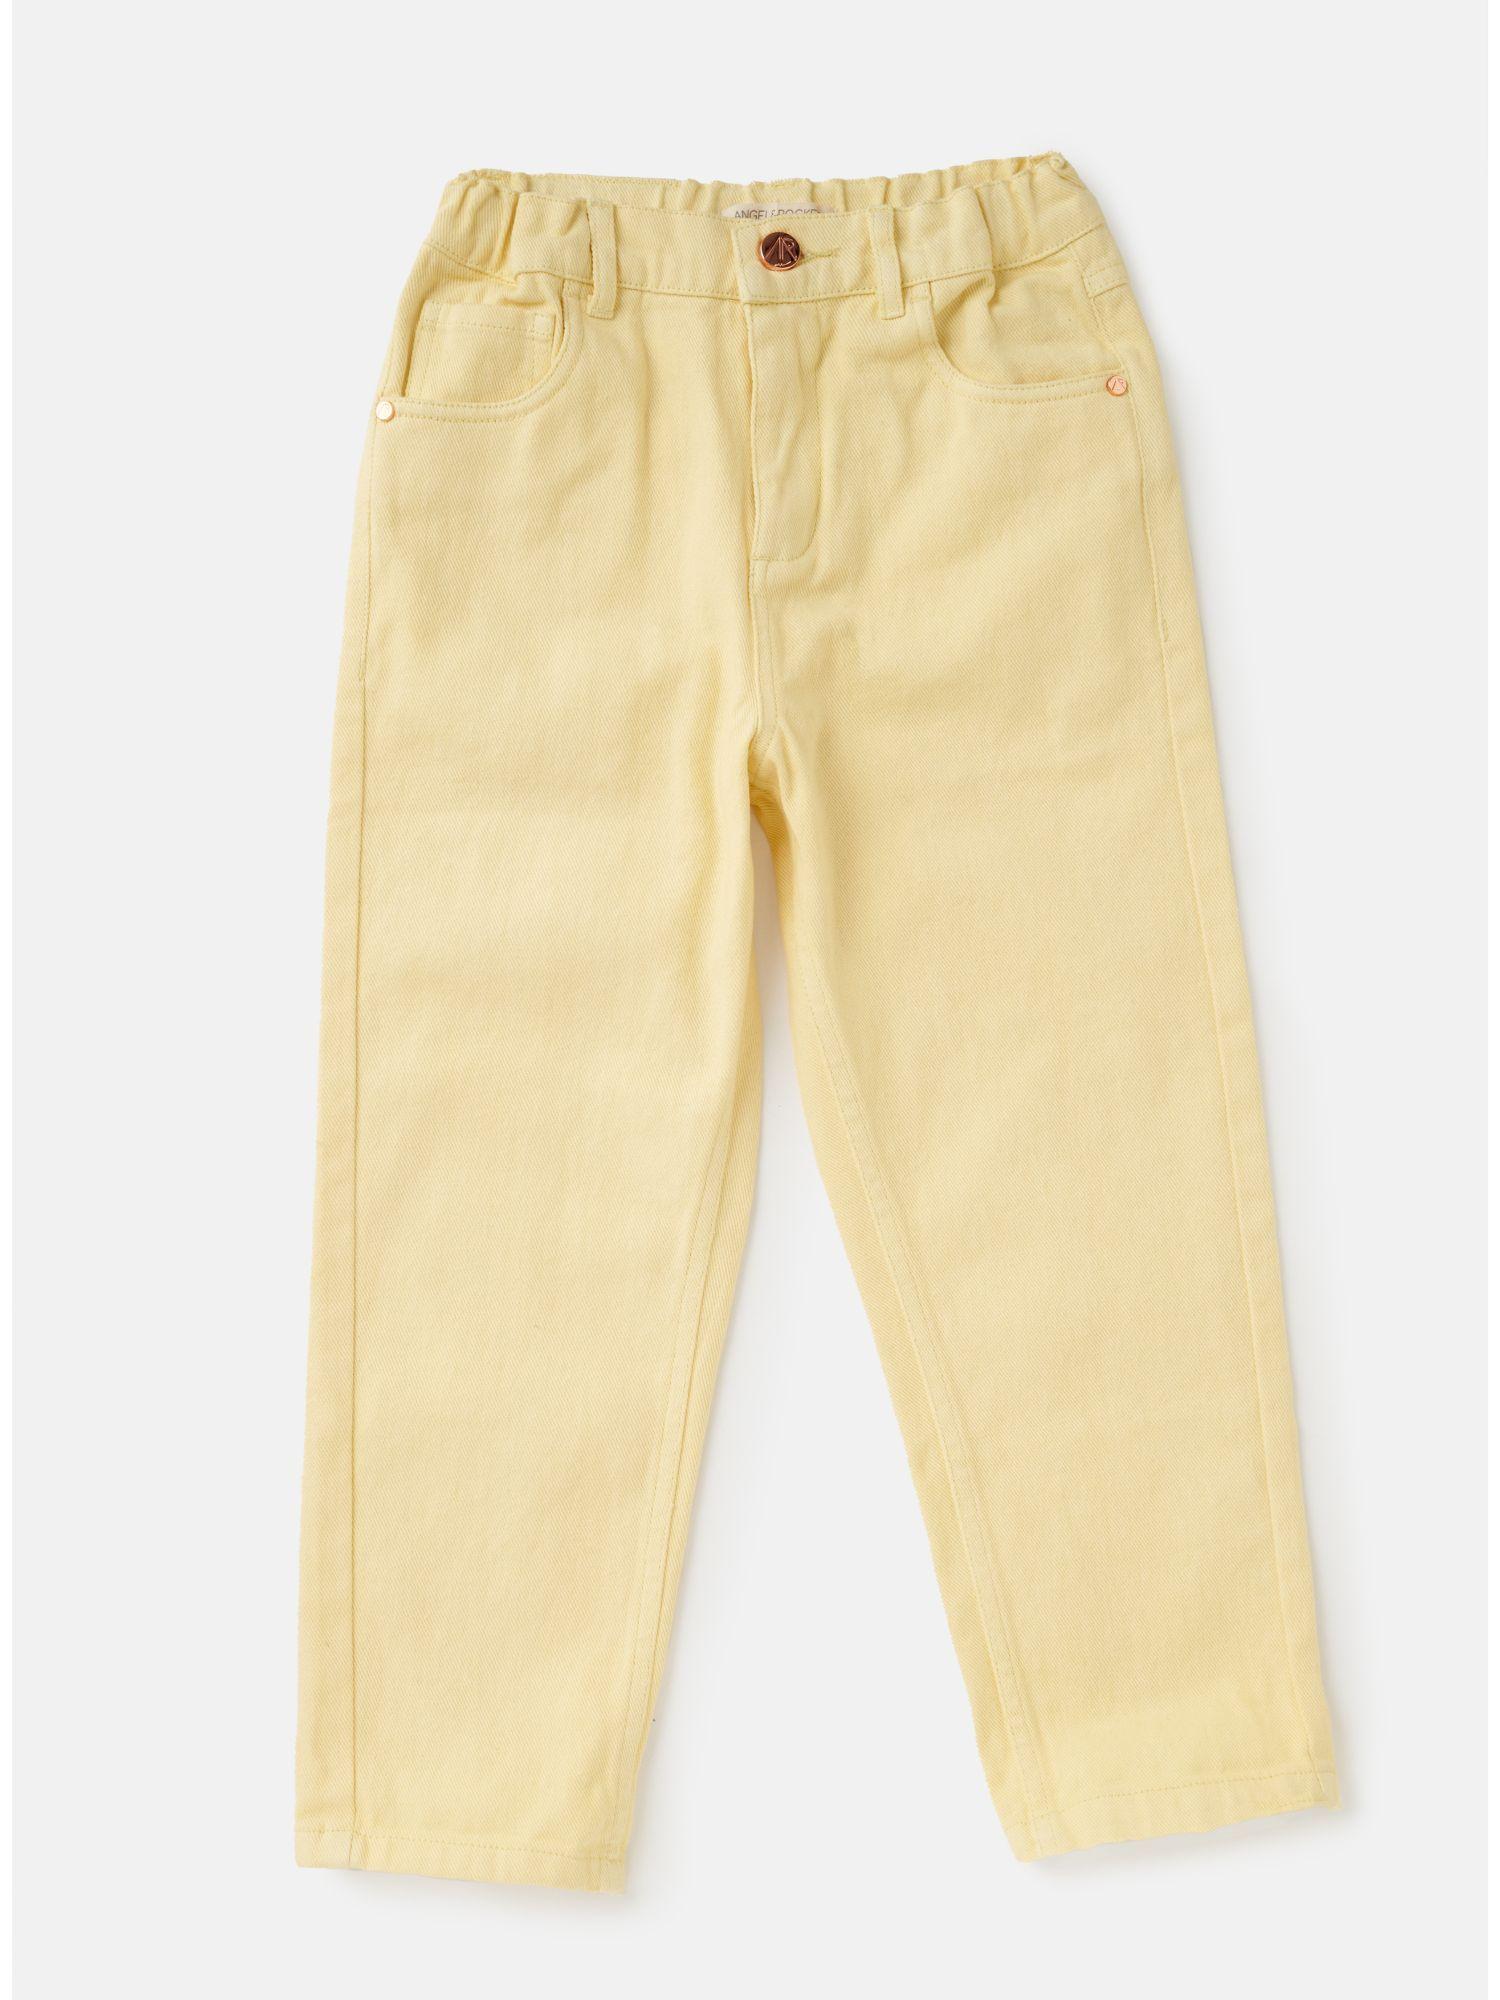 solid yellow trousers